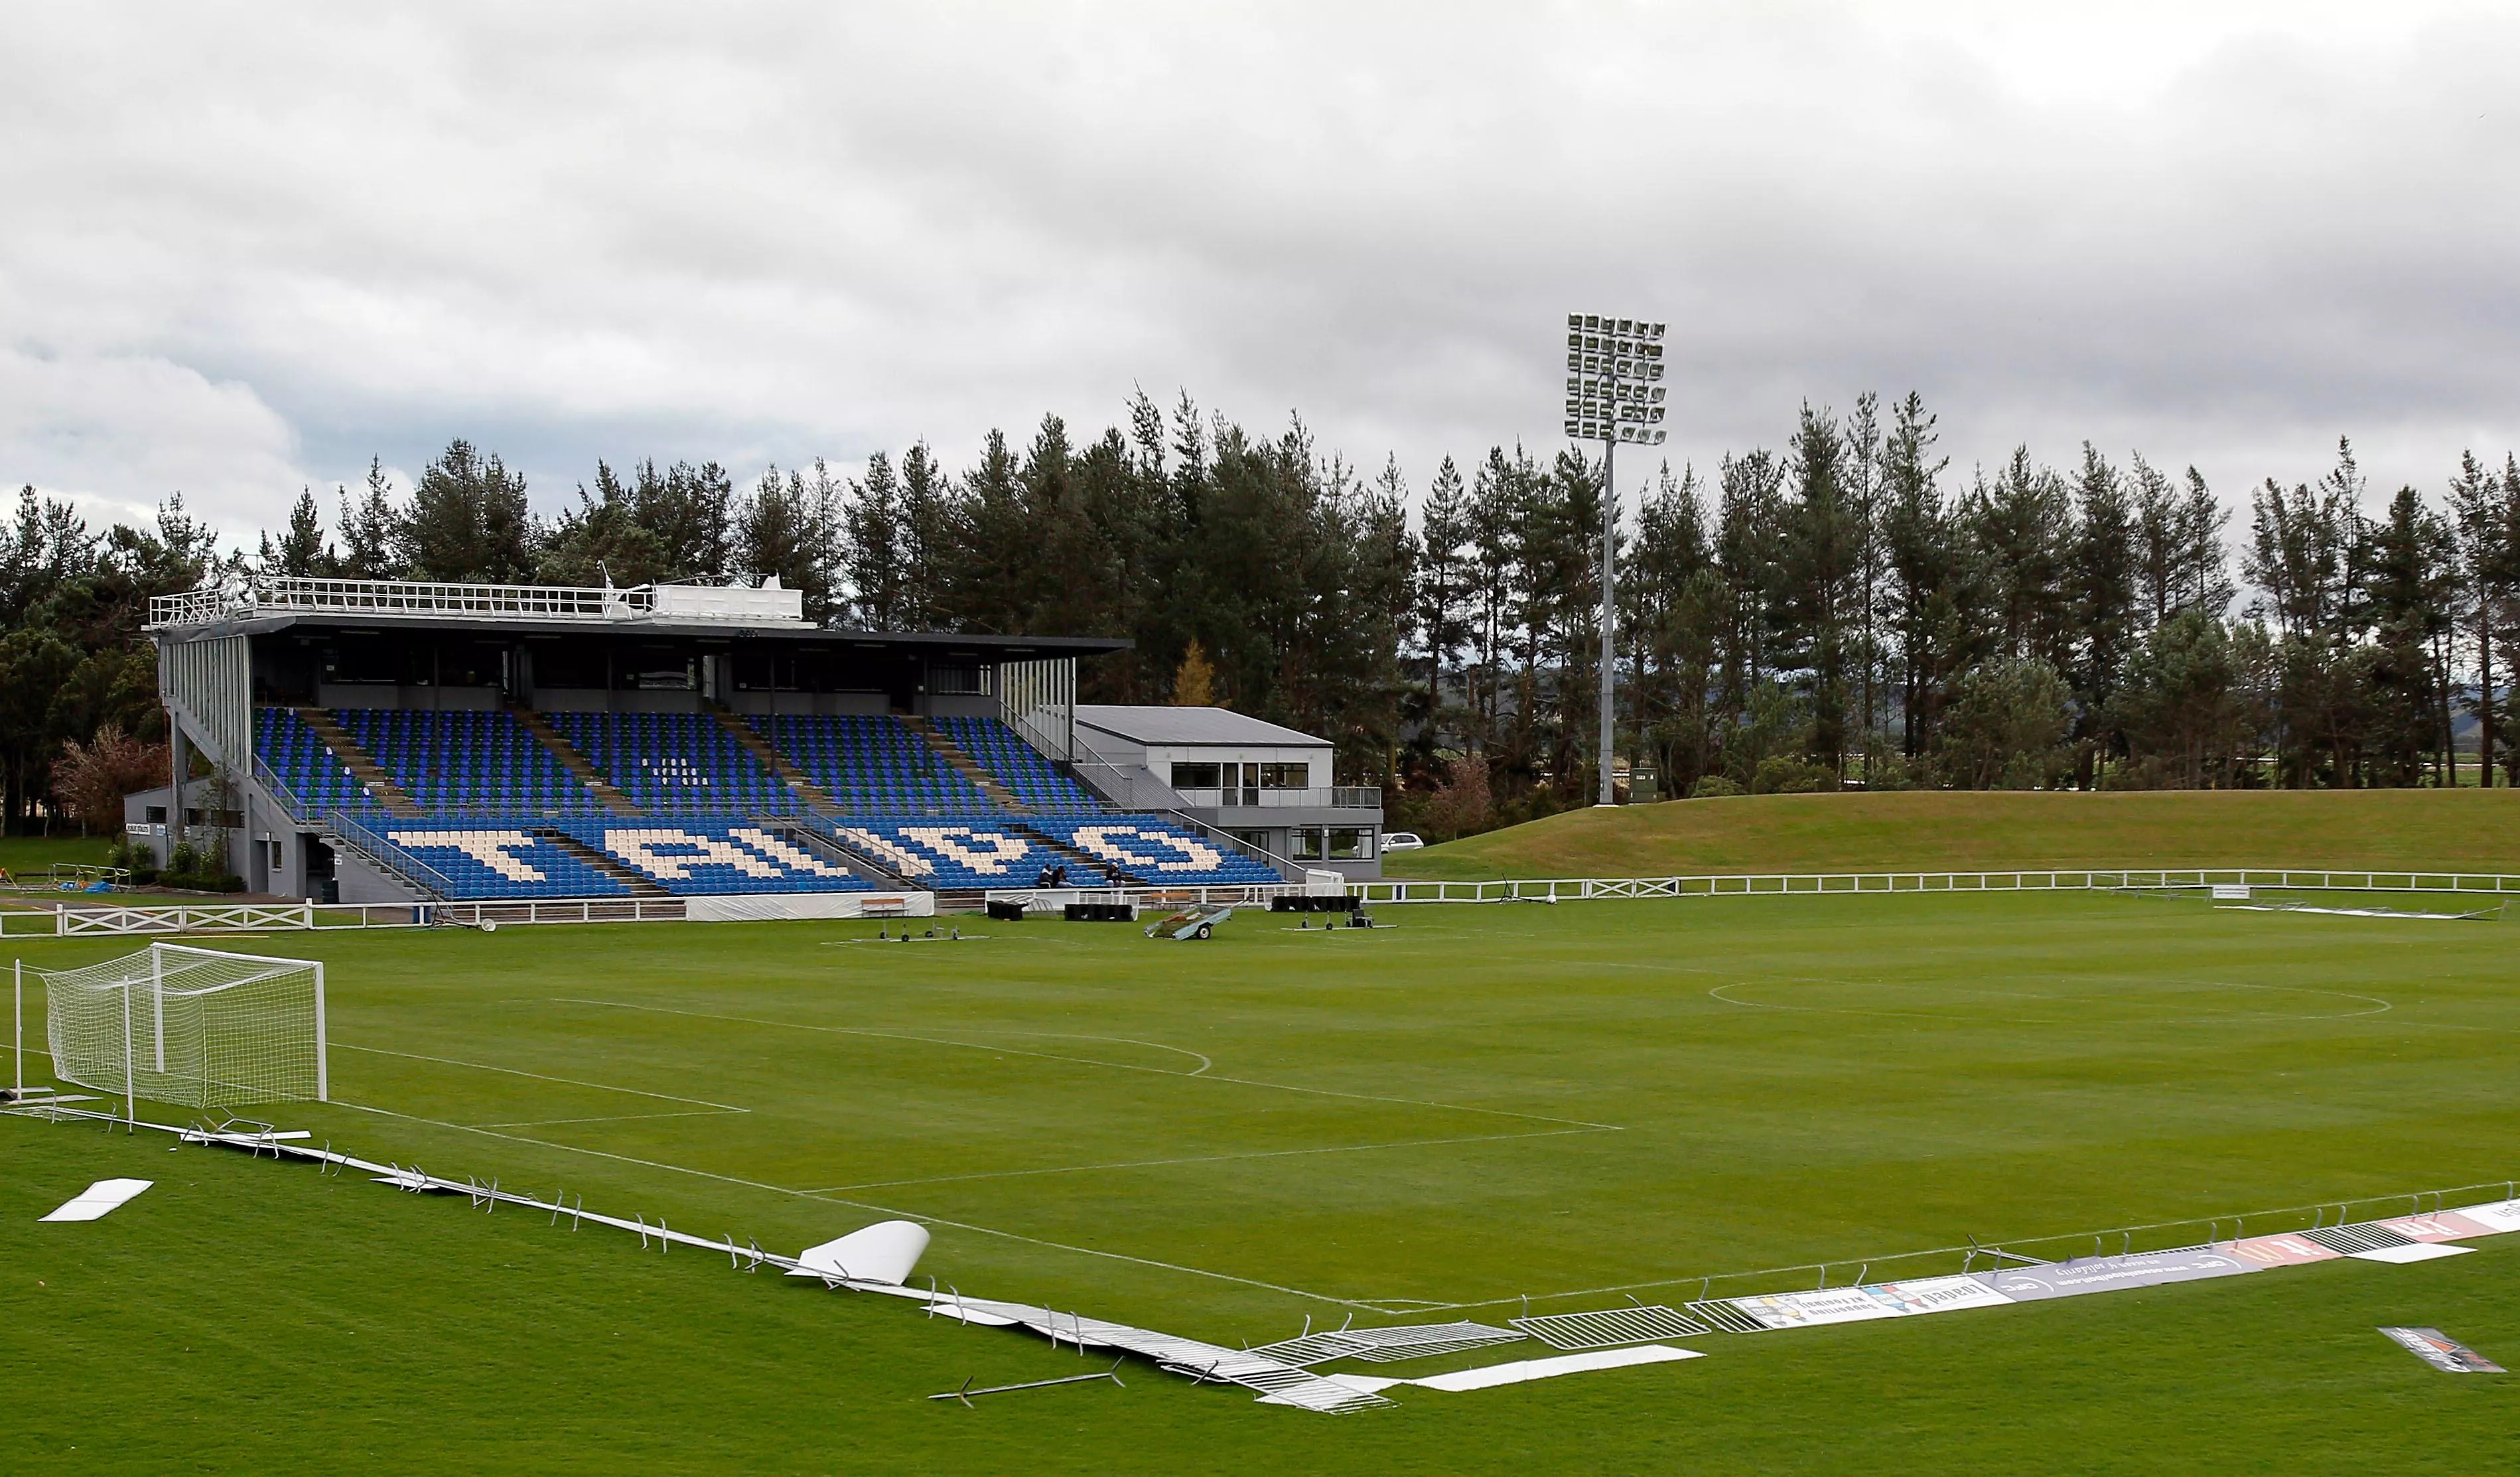 Owen Delany Park in New Zealand, Australia and Oceania | Cricket - Rated 0.8